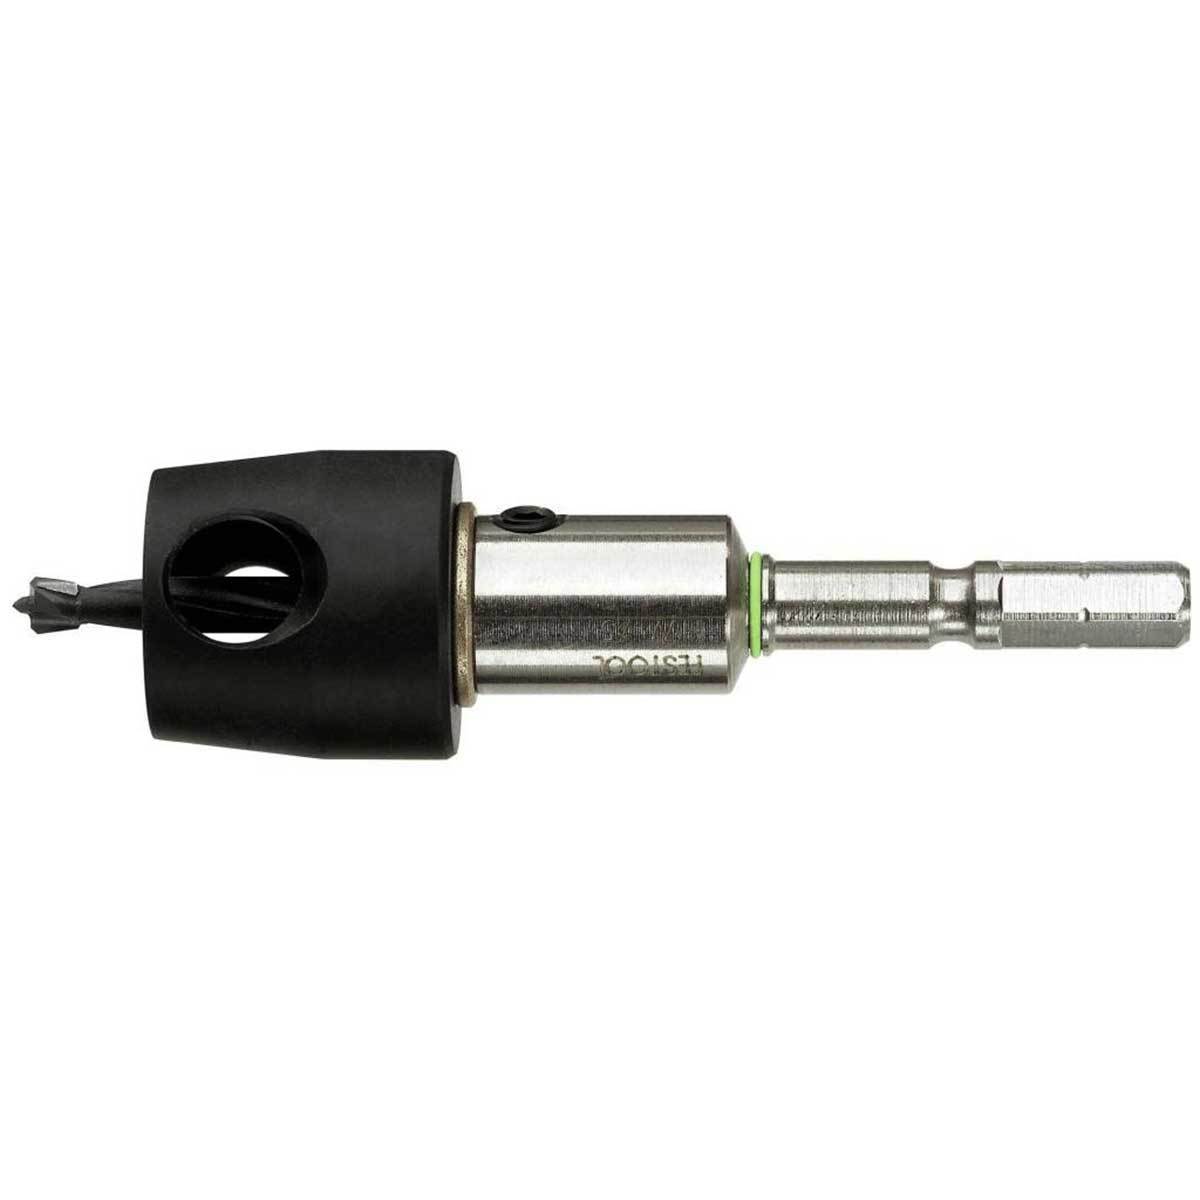 Centrotec Drill Bit with Depth Stop